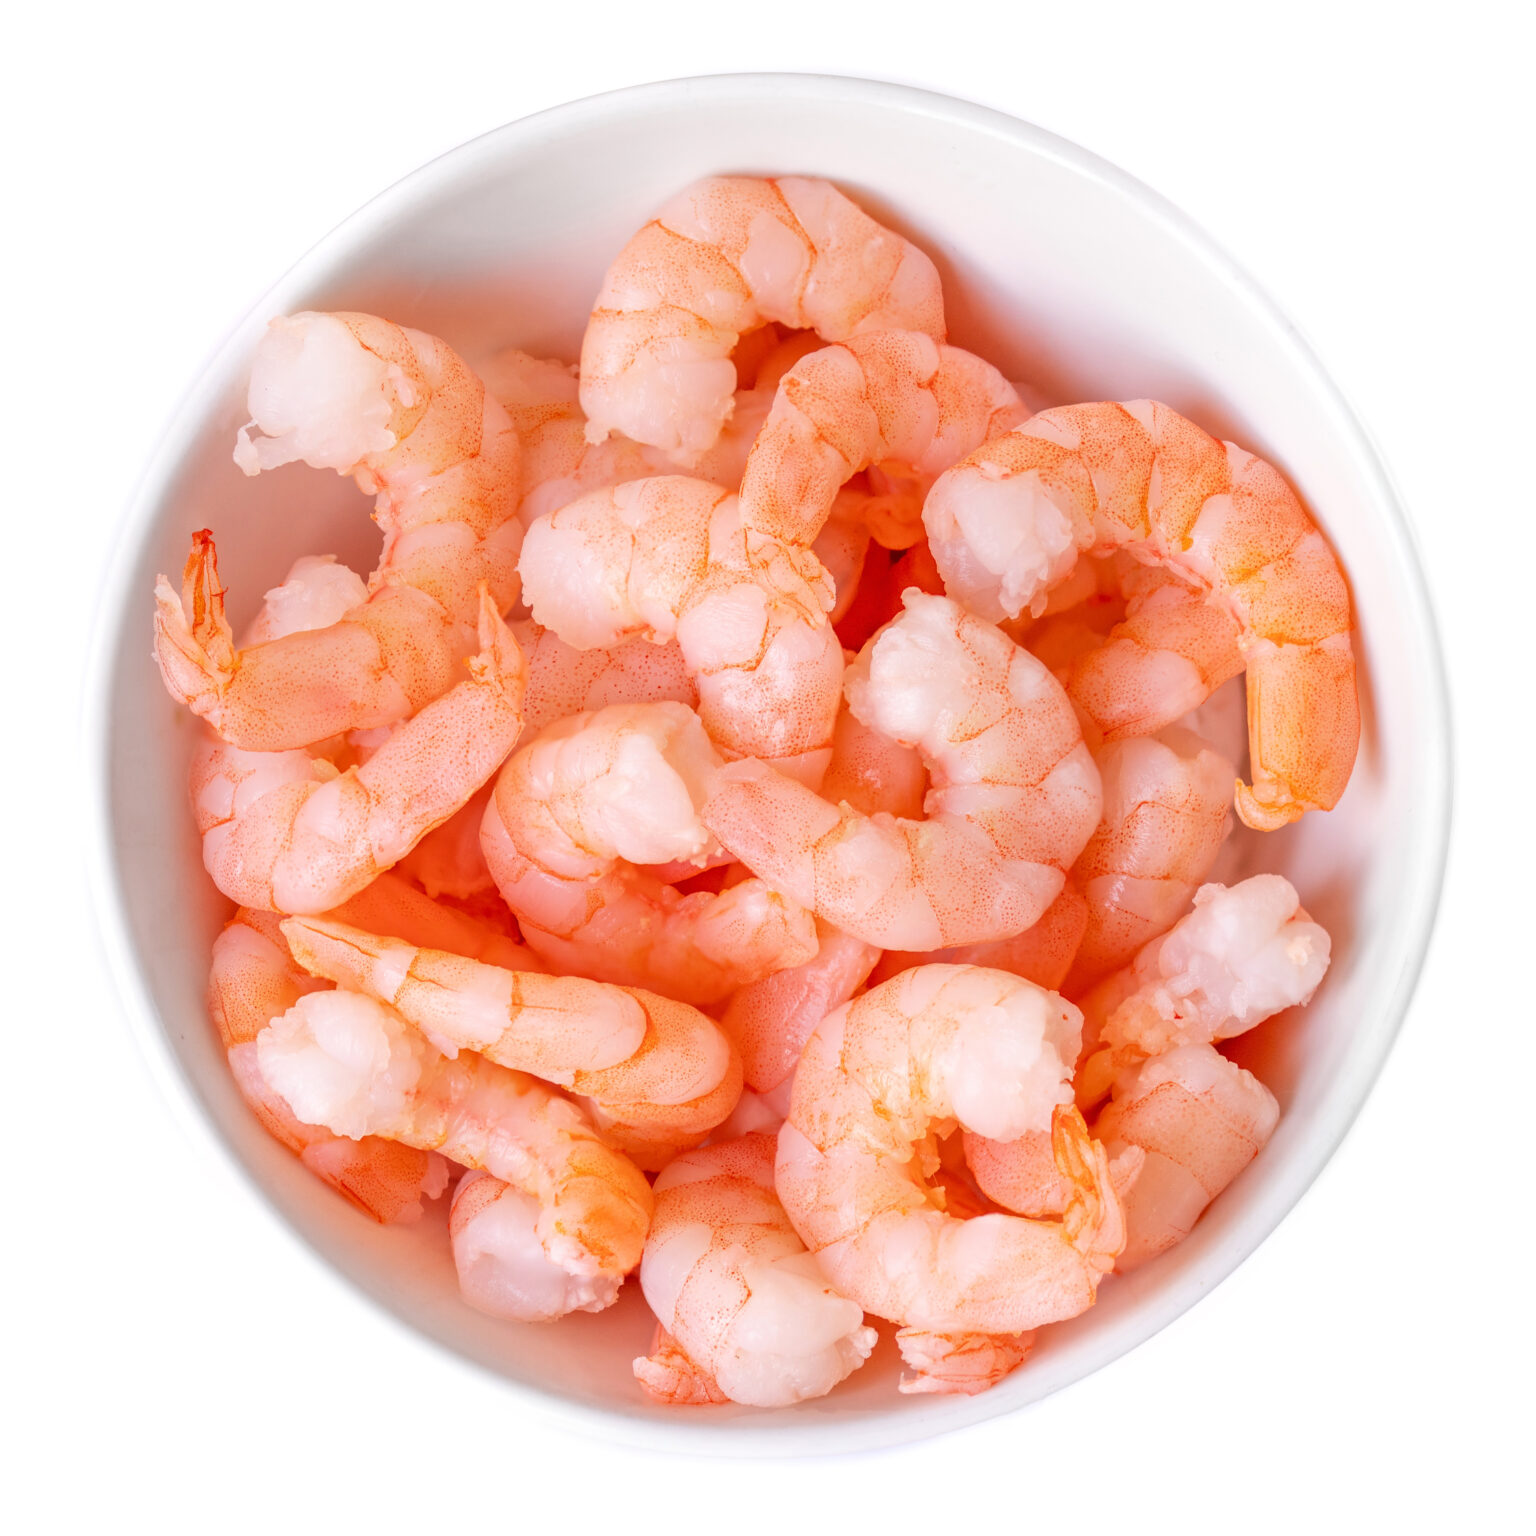 There's Currently A Nationwide Shrimp Recall Due To Salmonella, So